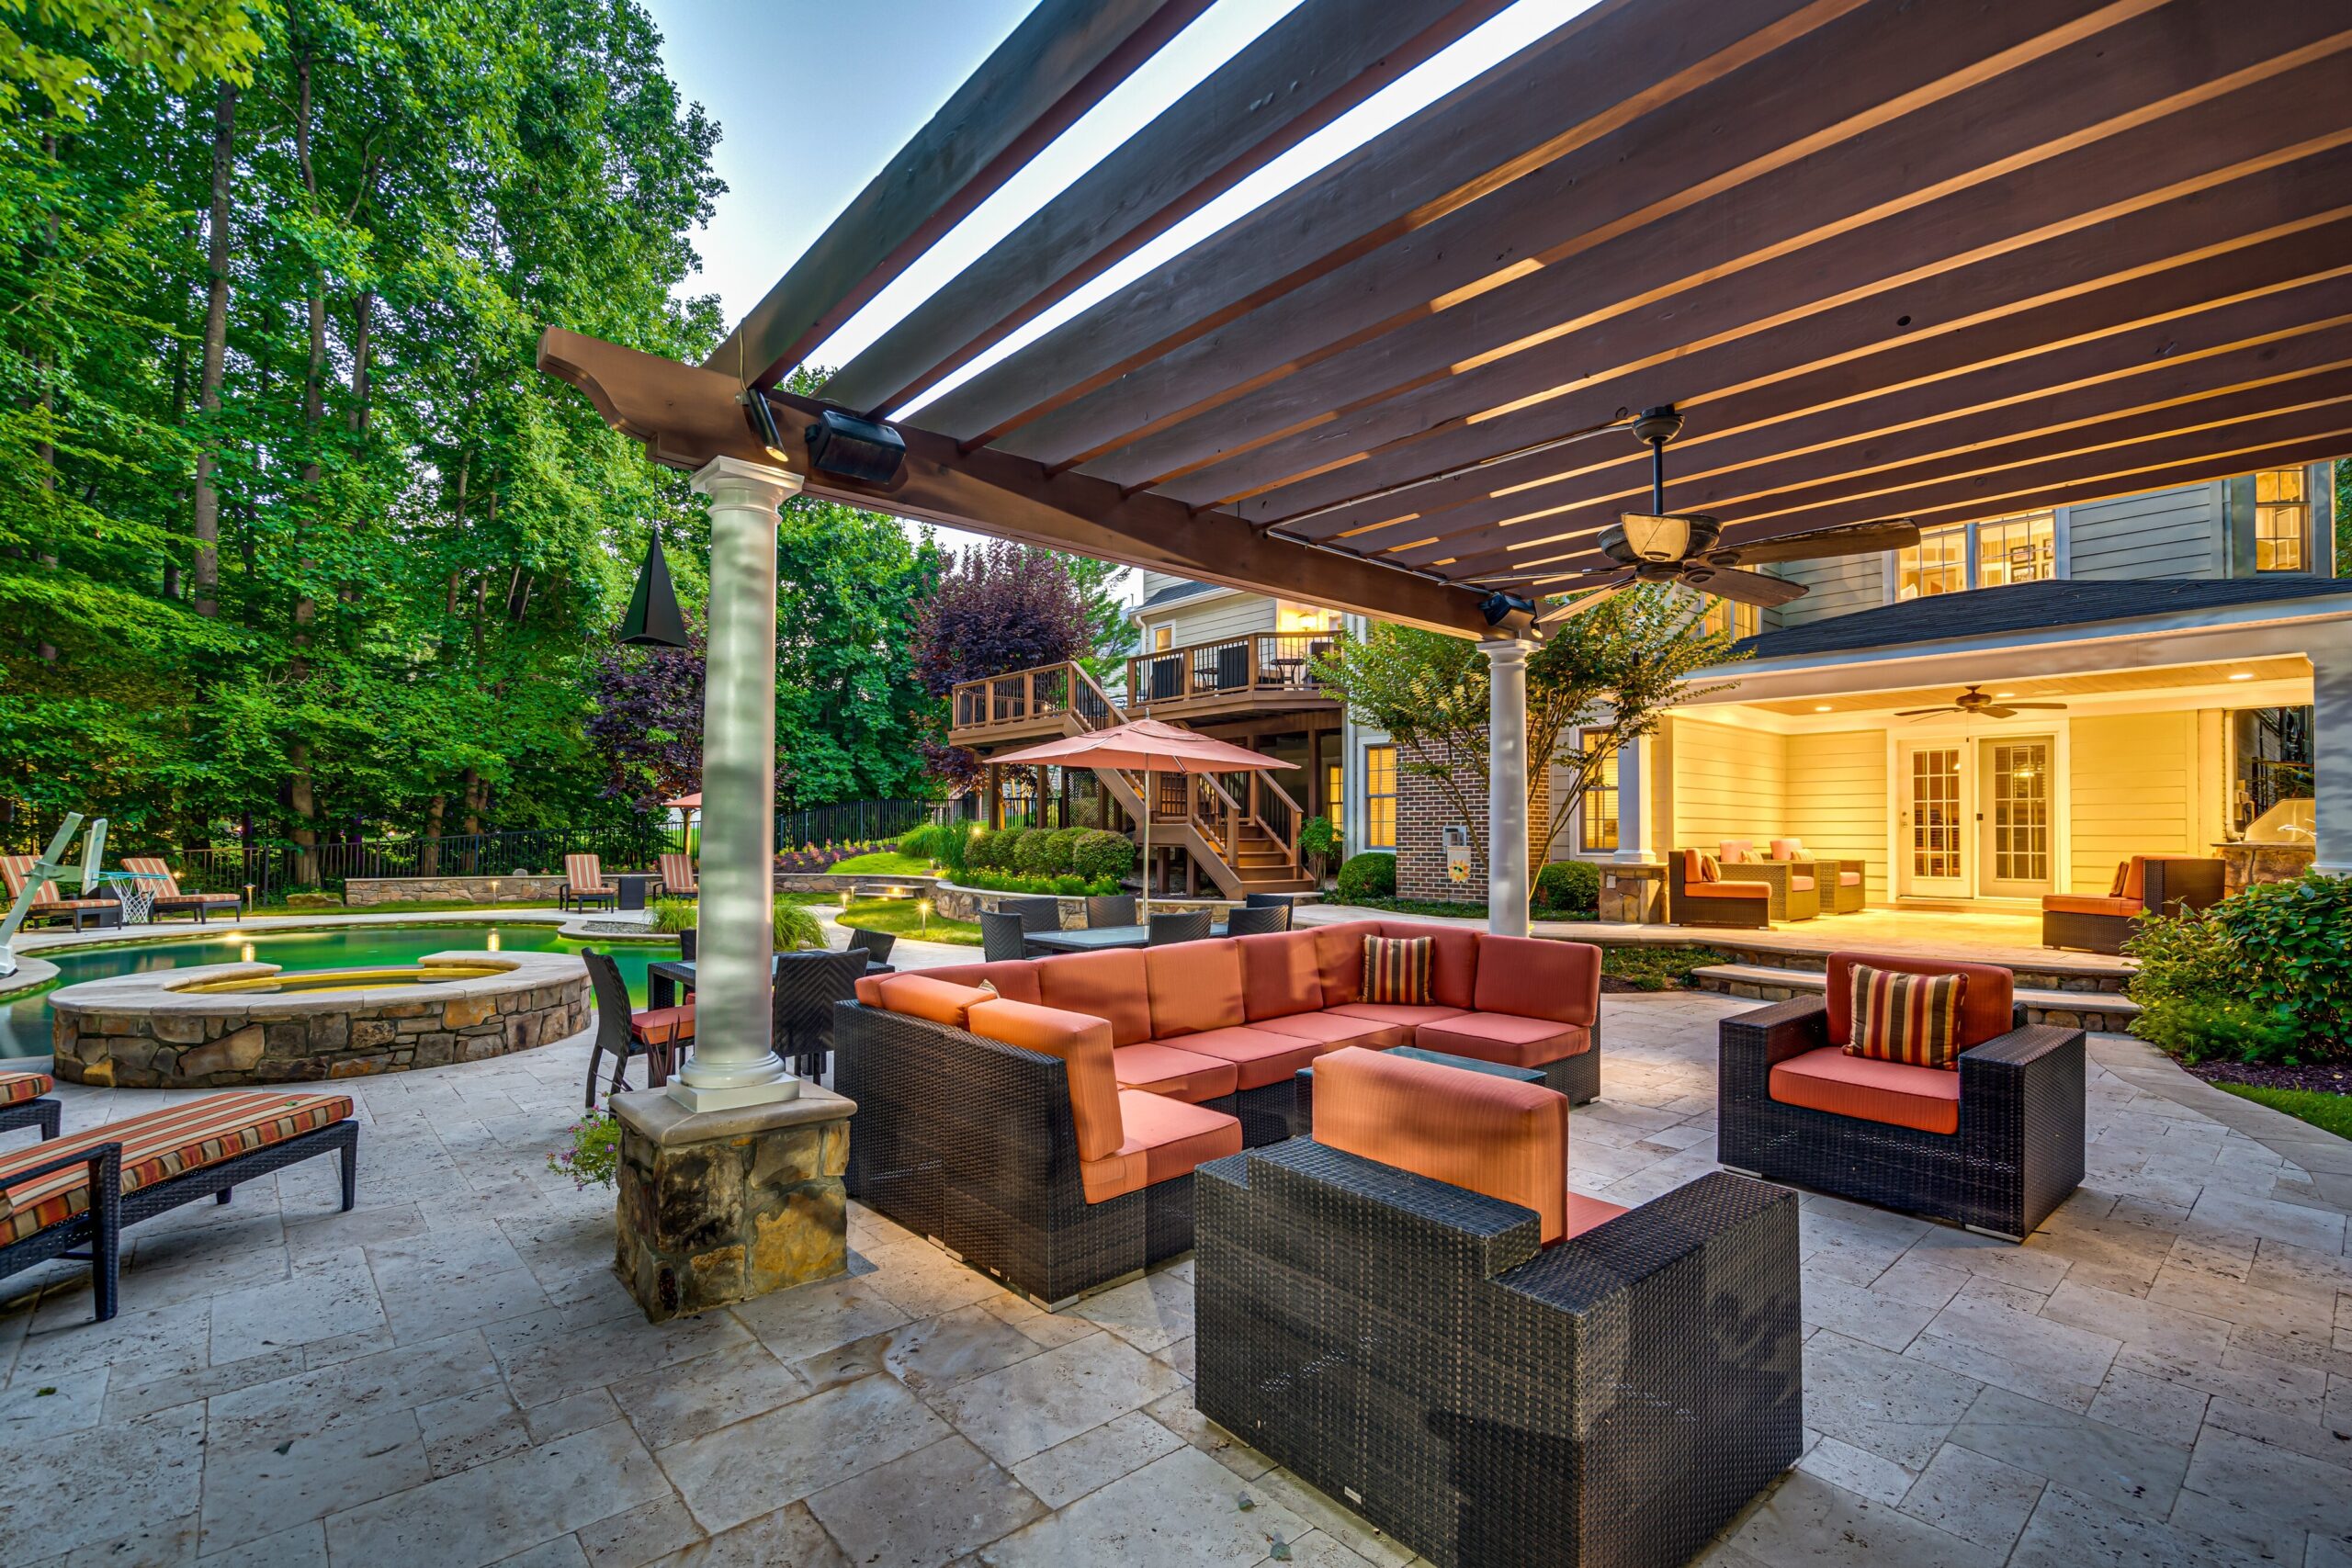 Exterior lounge area at dusk by the pool with the warmly lit home and deck in the background. 10703 Ox Croft Ct, Fairfax Station, VA